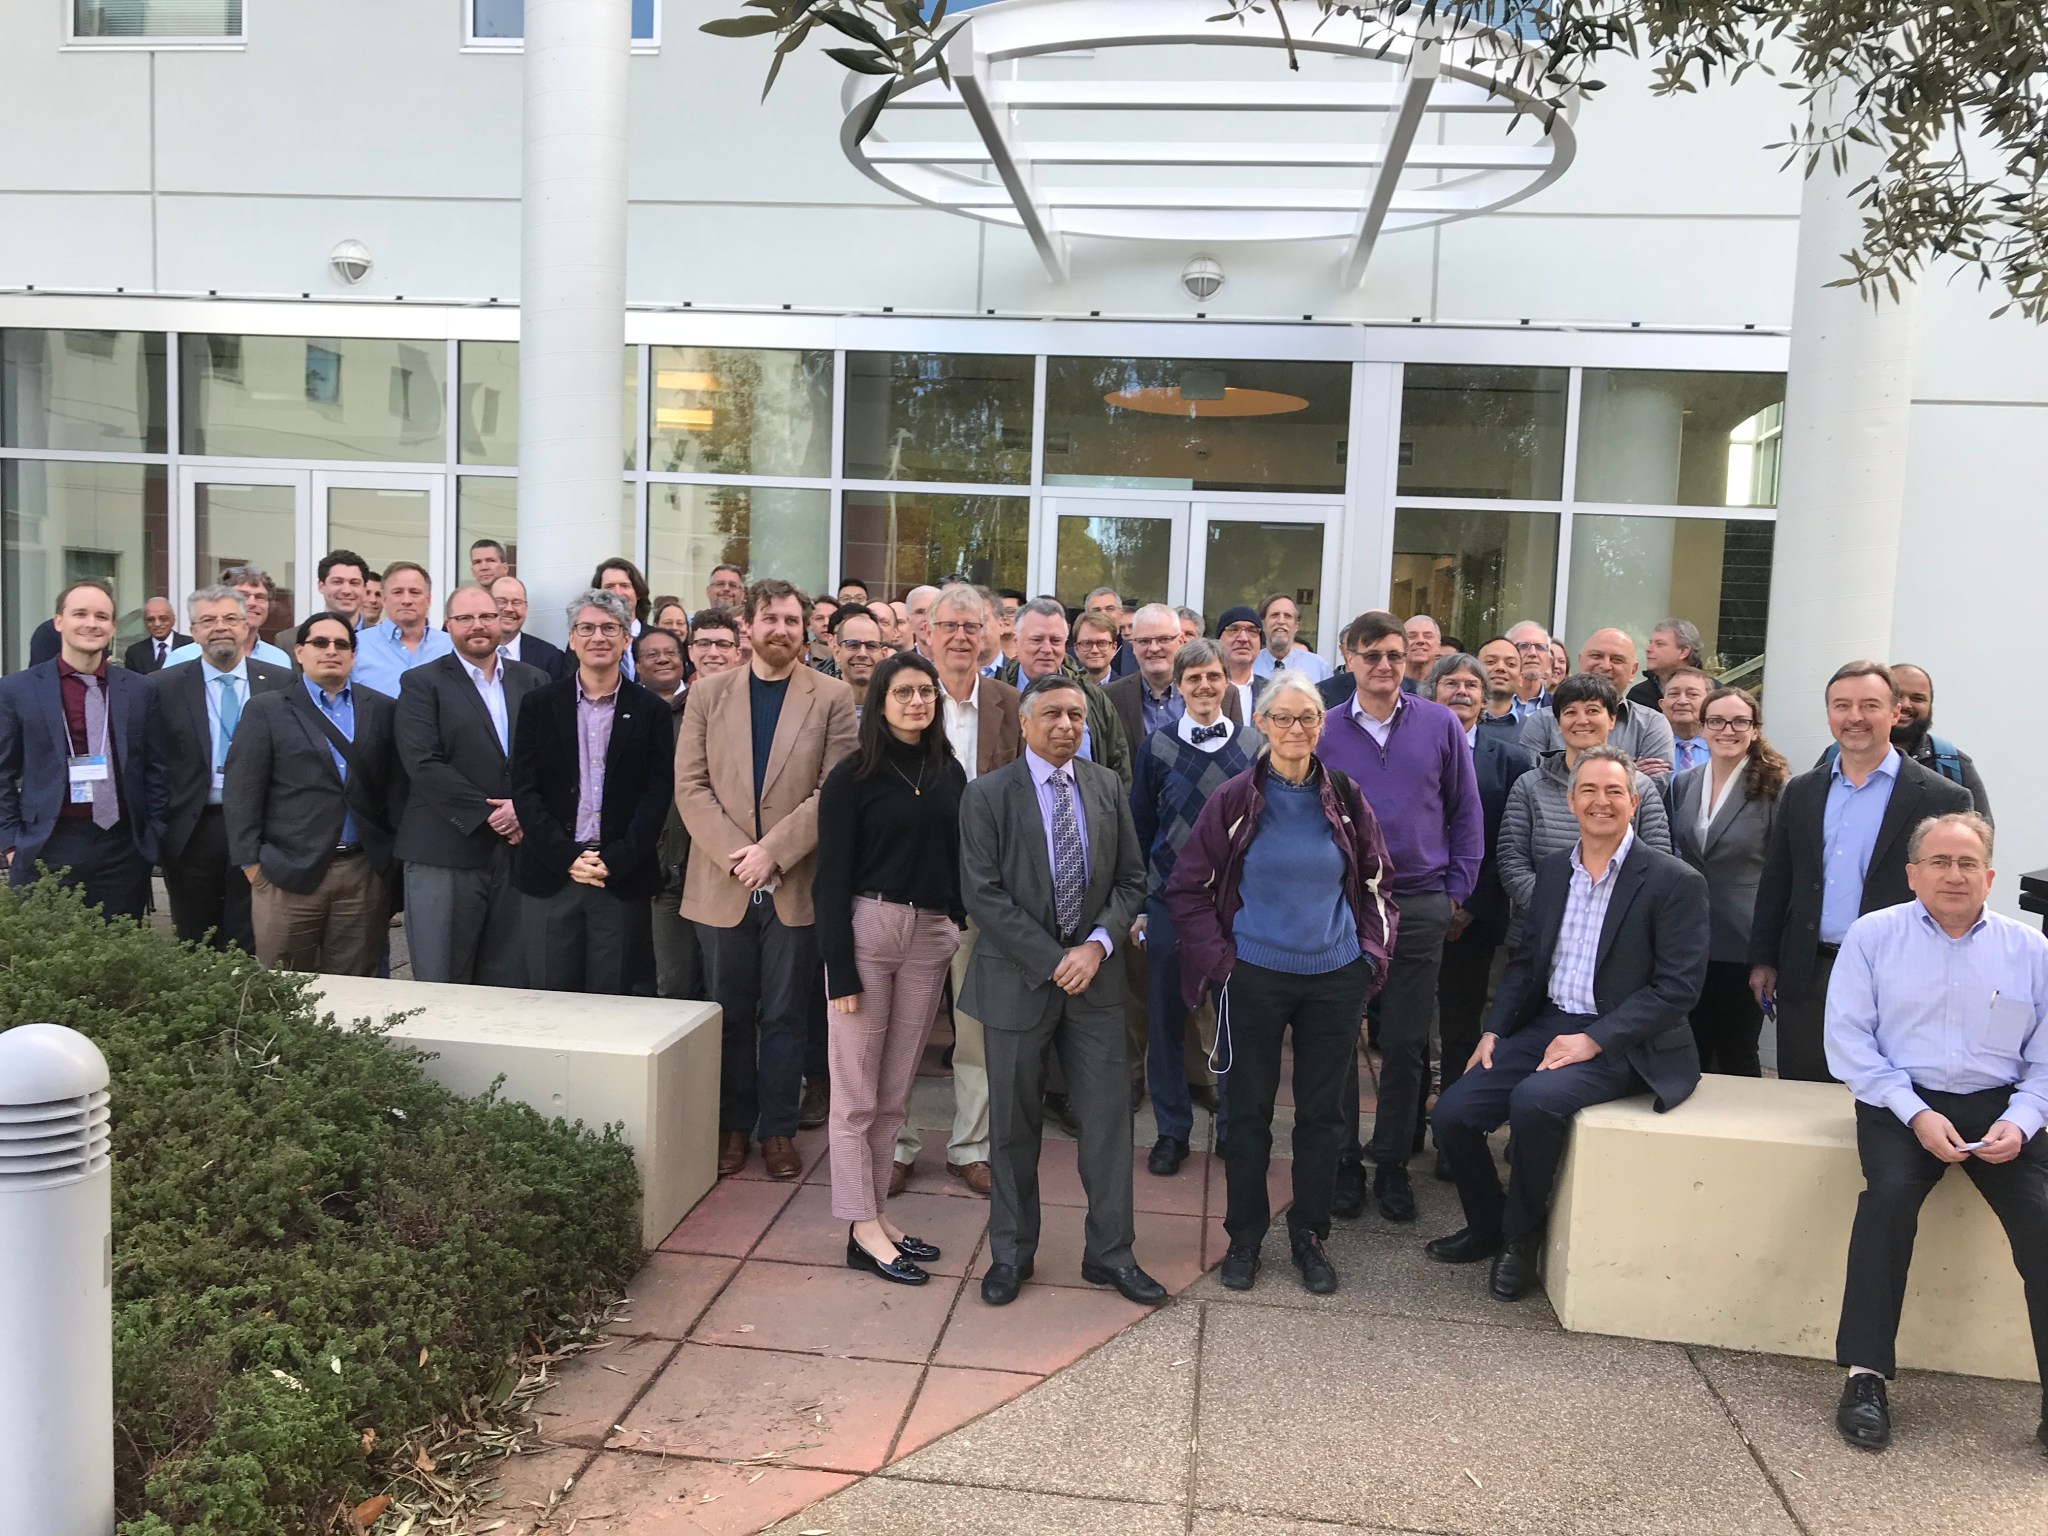 Over 70 technical and program leaders attended the Workshop on Space Quantum Communications and Networks at University of California, Berkley.